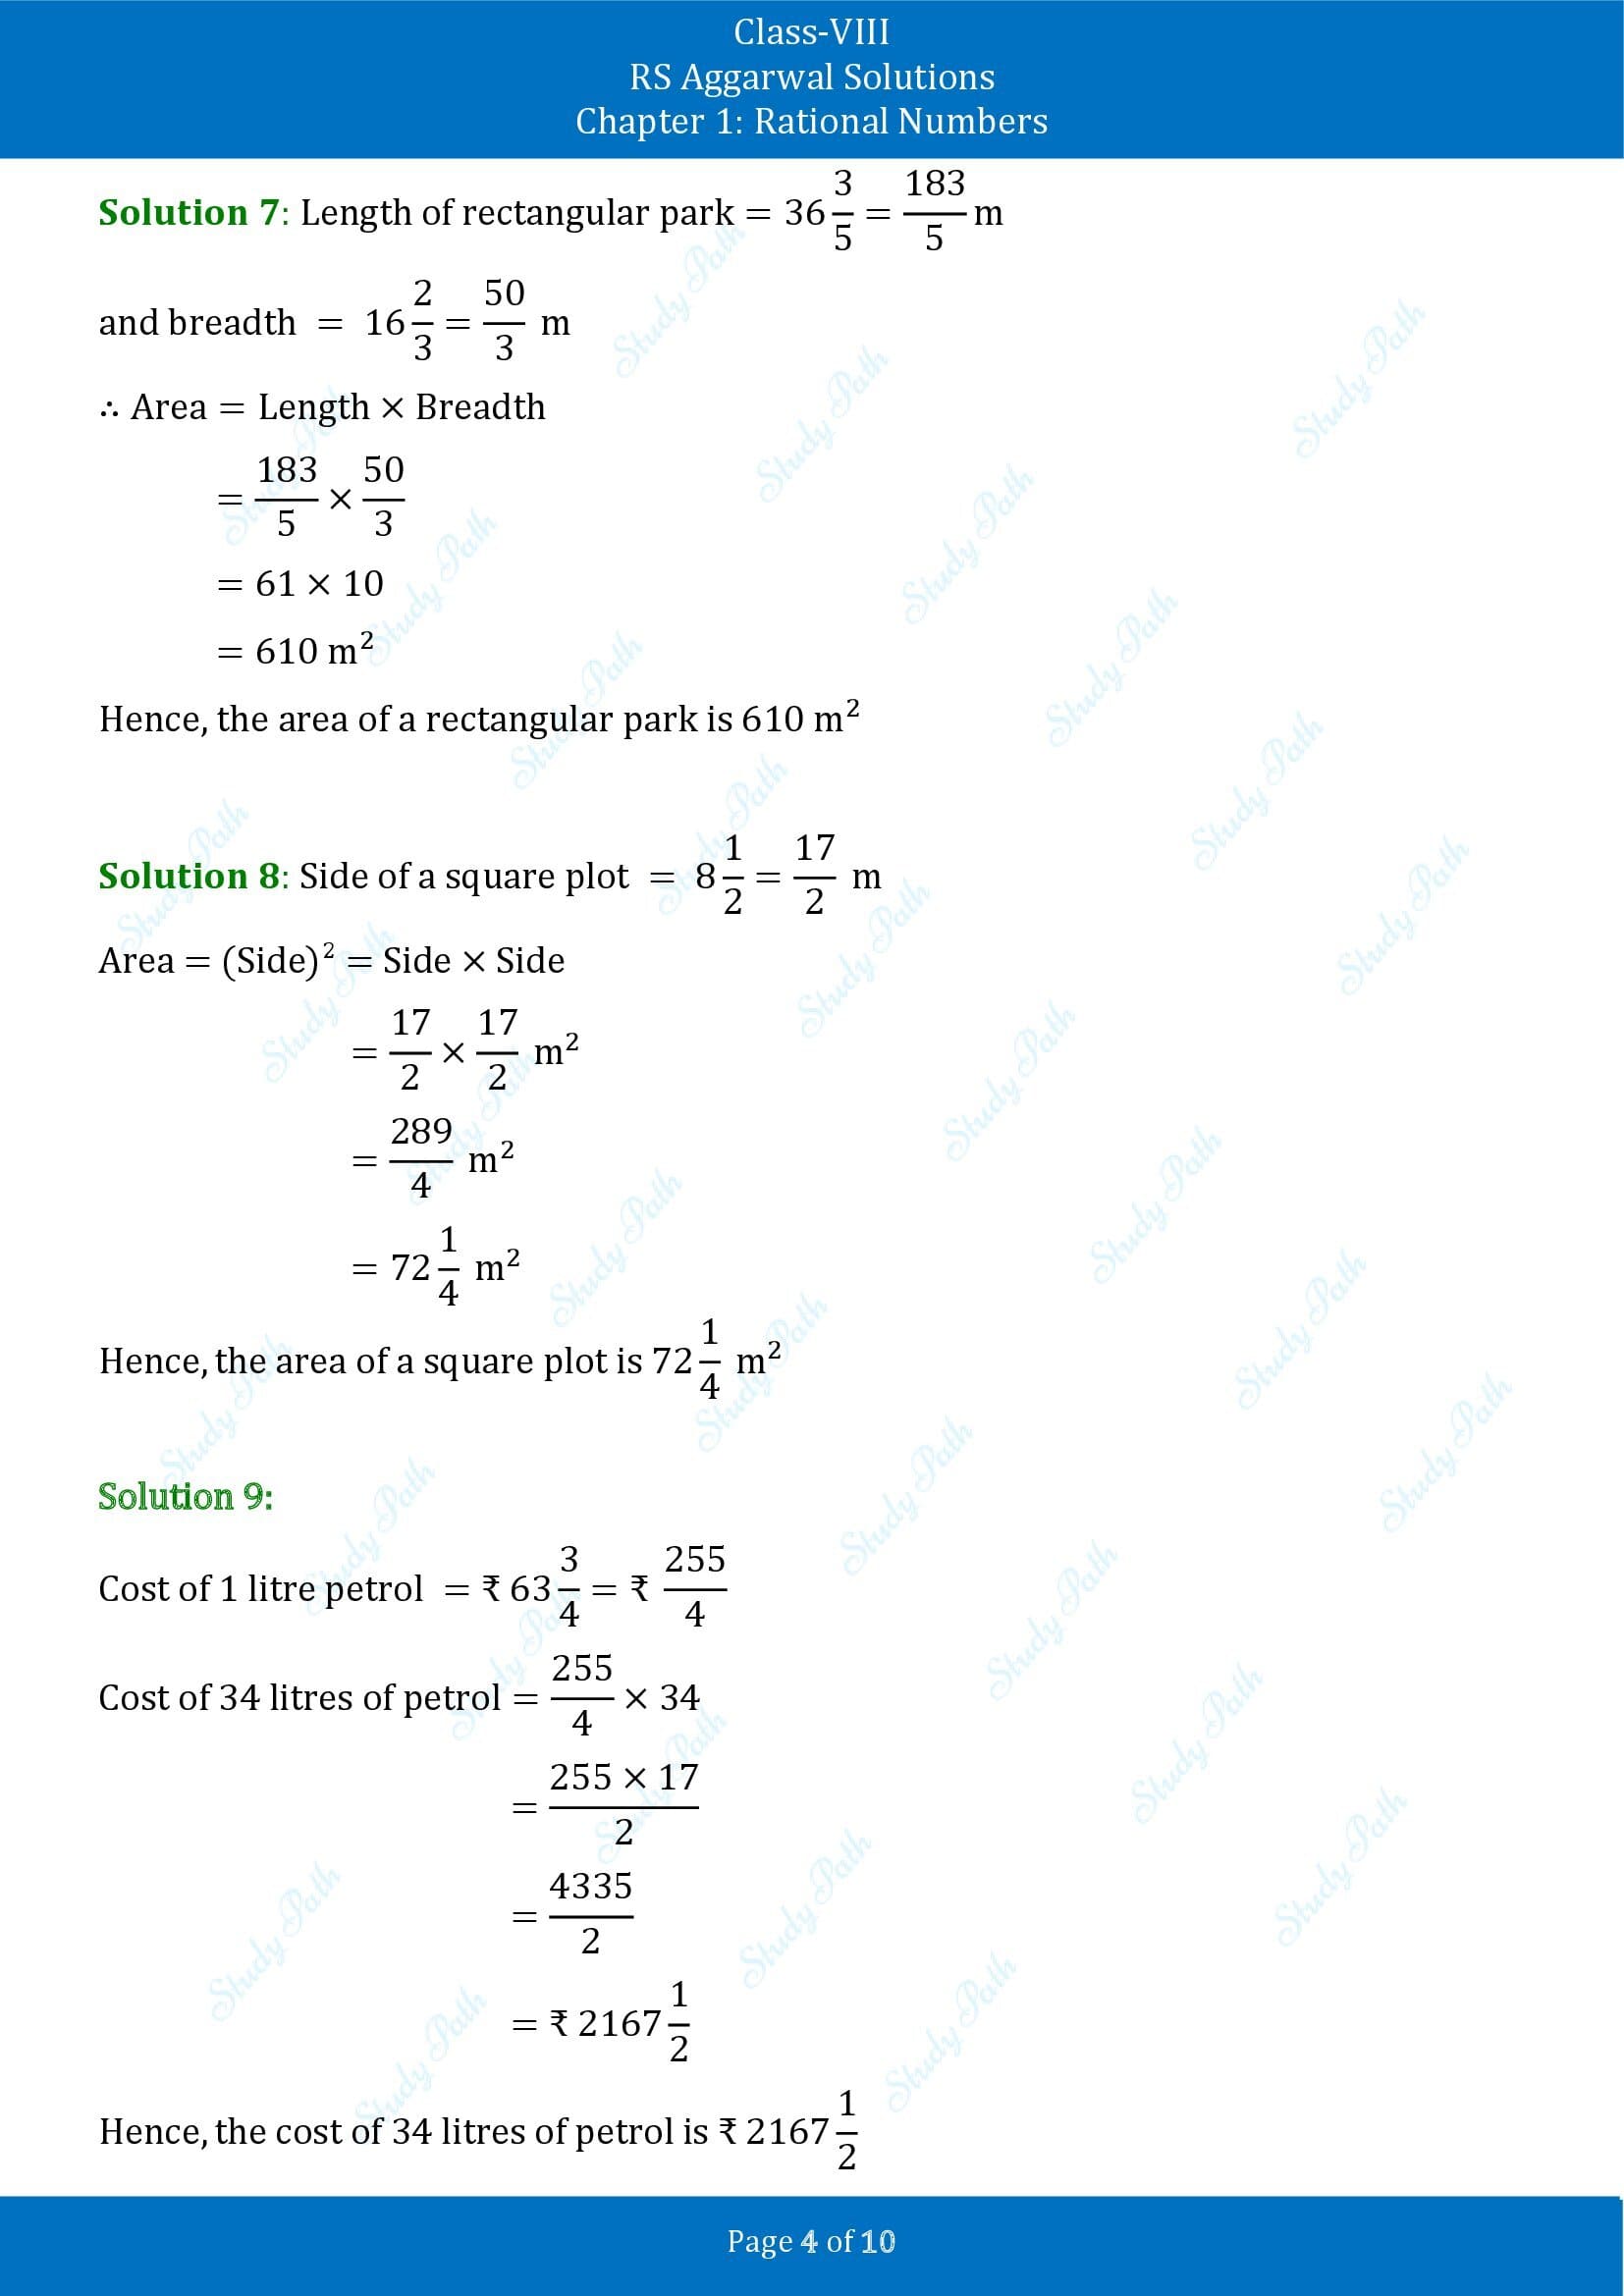 RS Aggarwal Solutions Class 8 Chapter 1 Rational Numbers Exercise 1G 00004